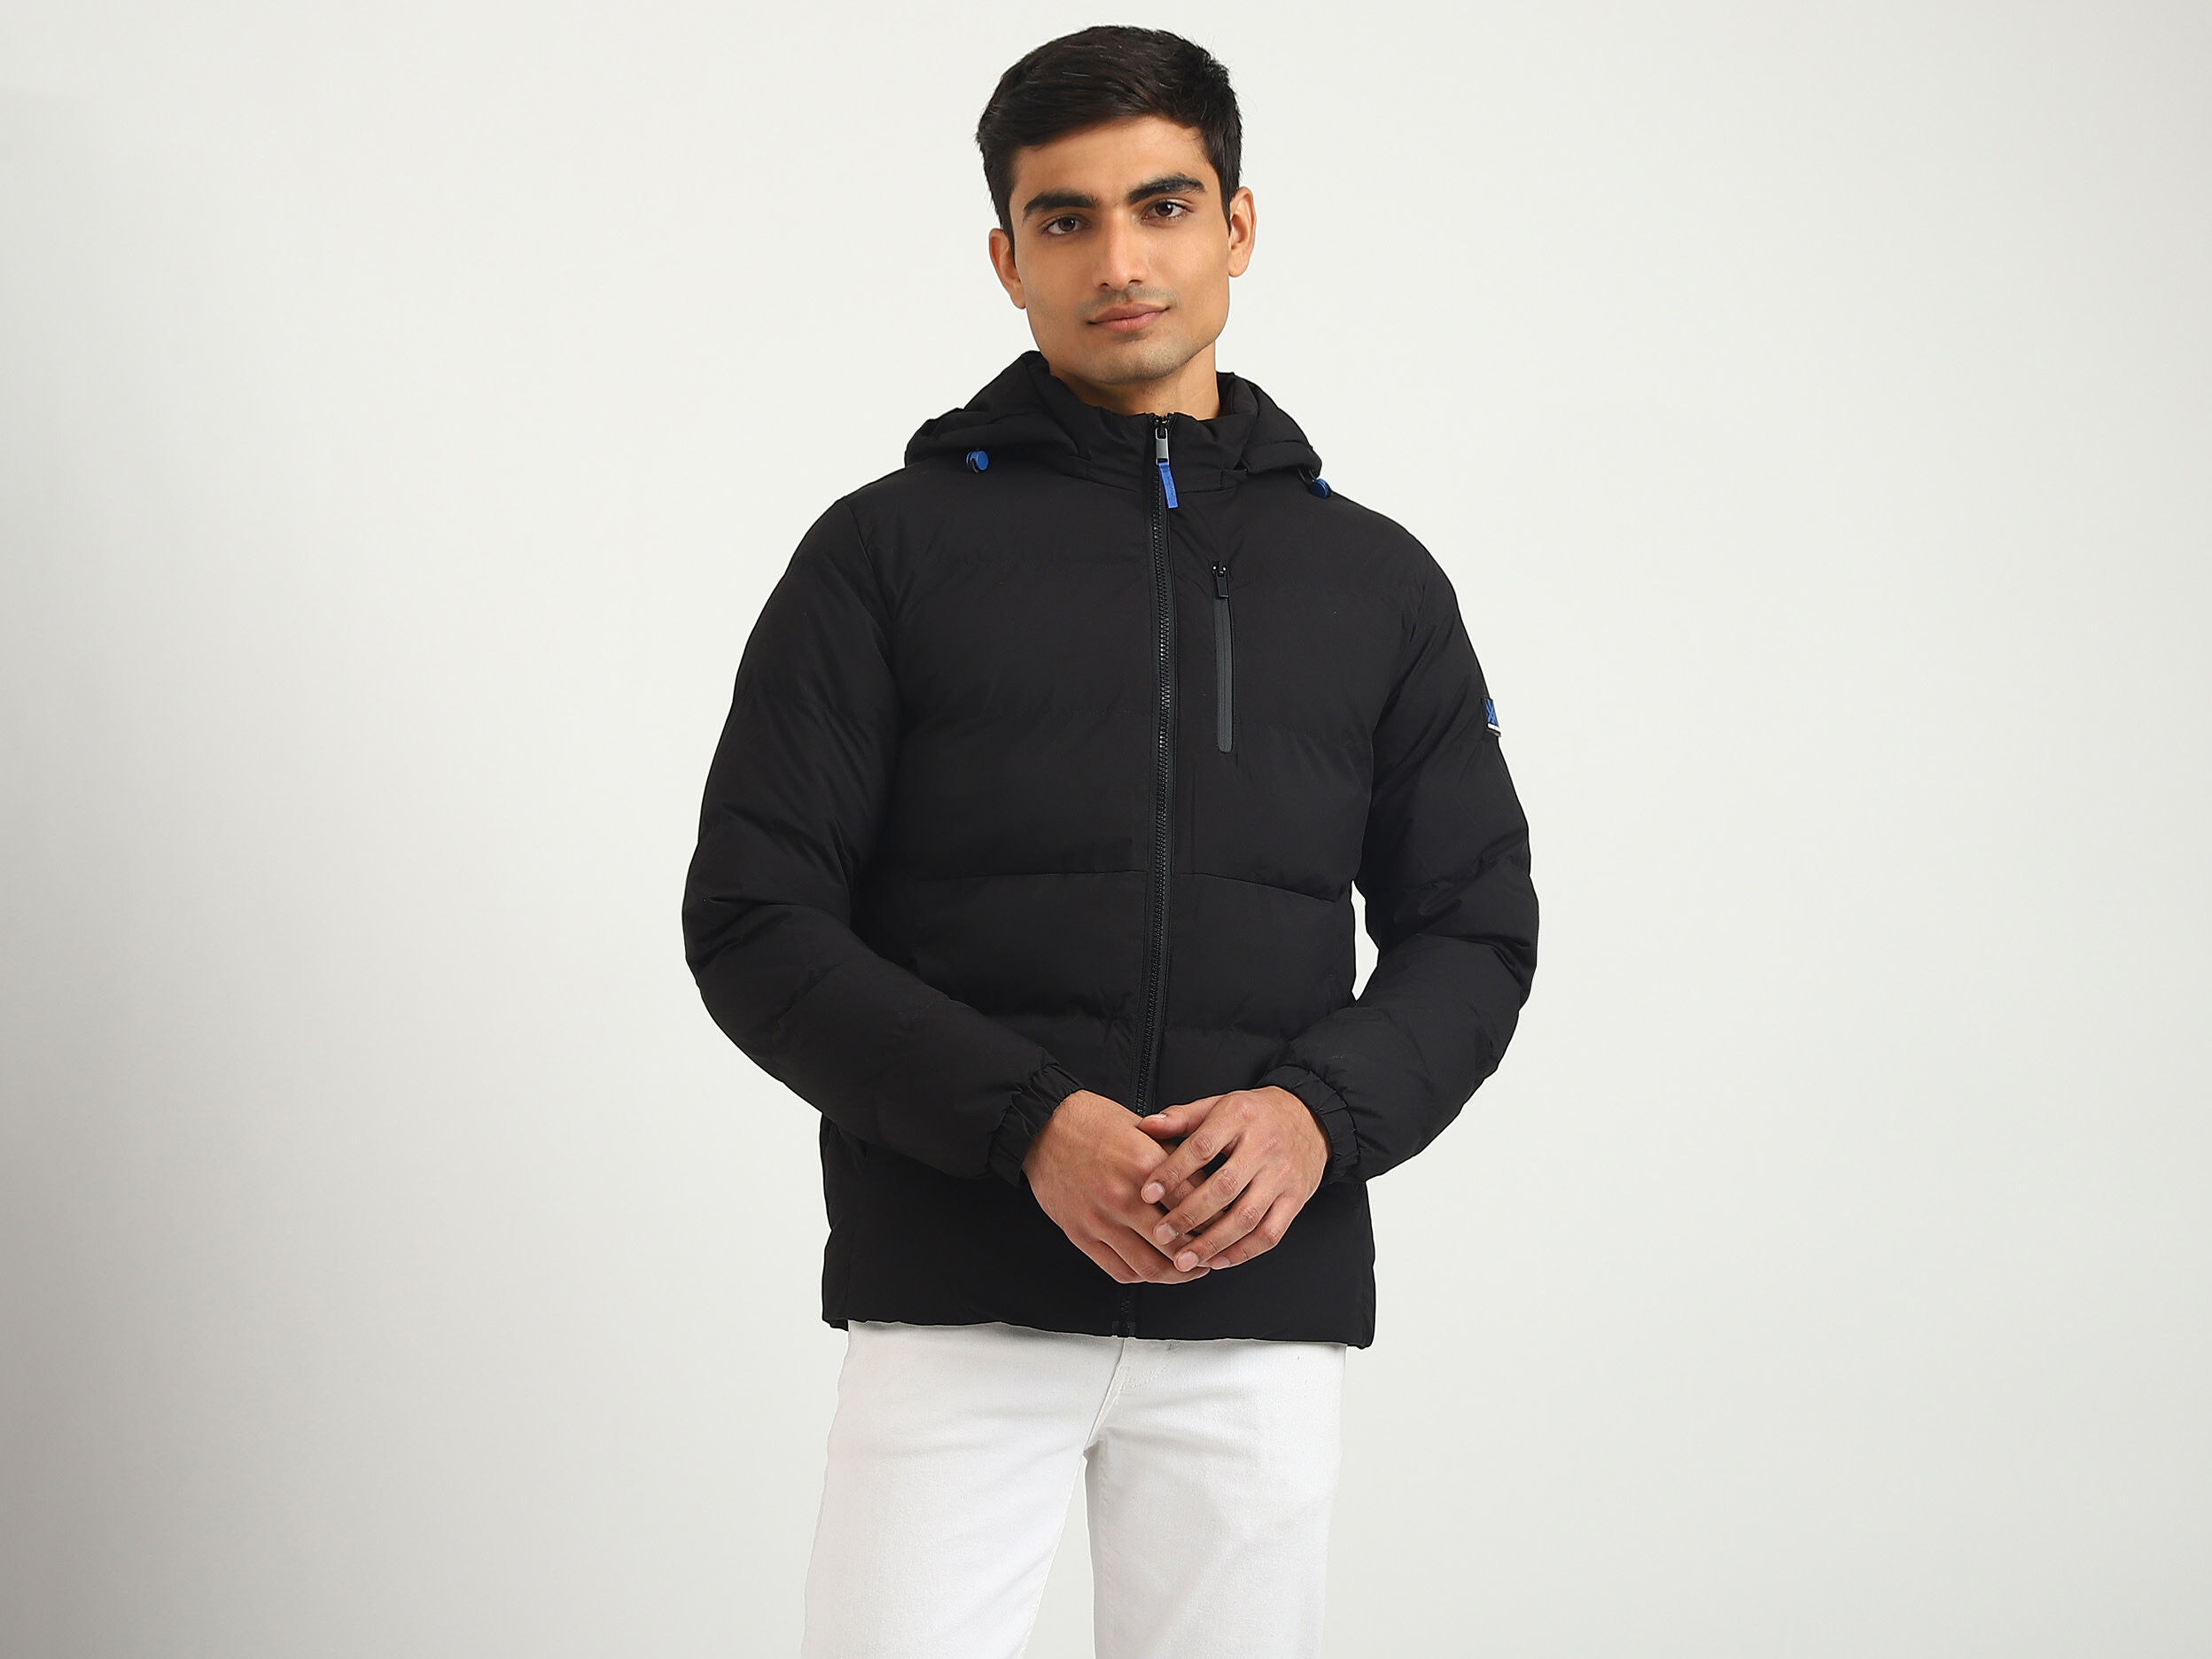 Buy United Colors of Benetton Boys Solid Hooded Neck Jacket online